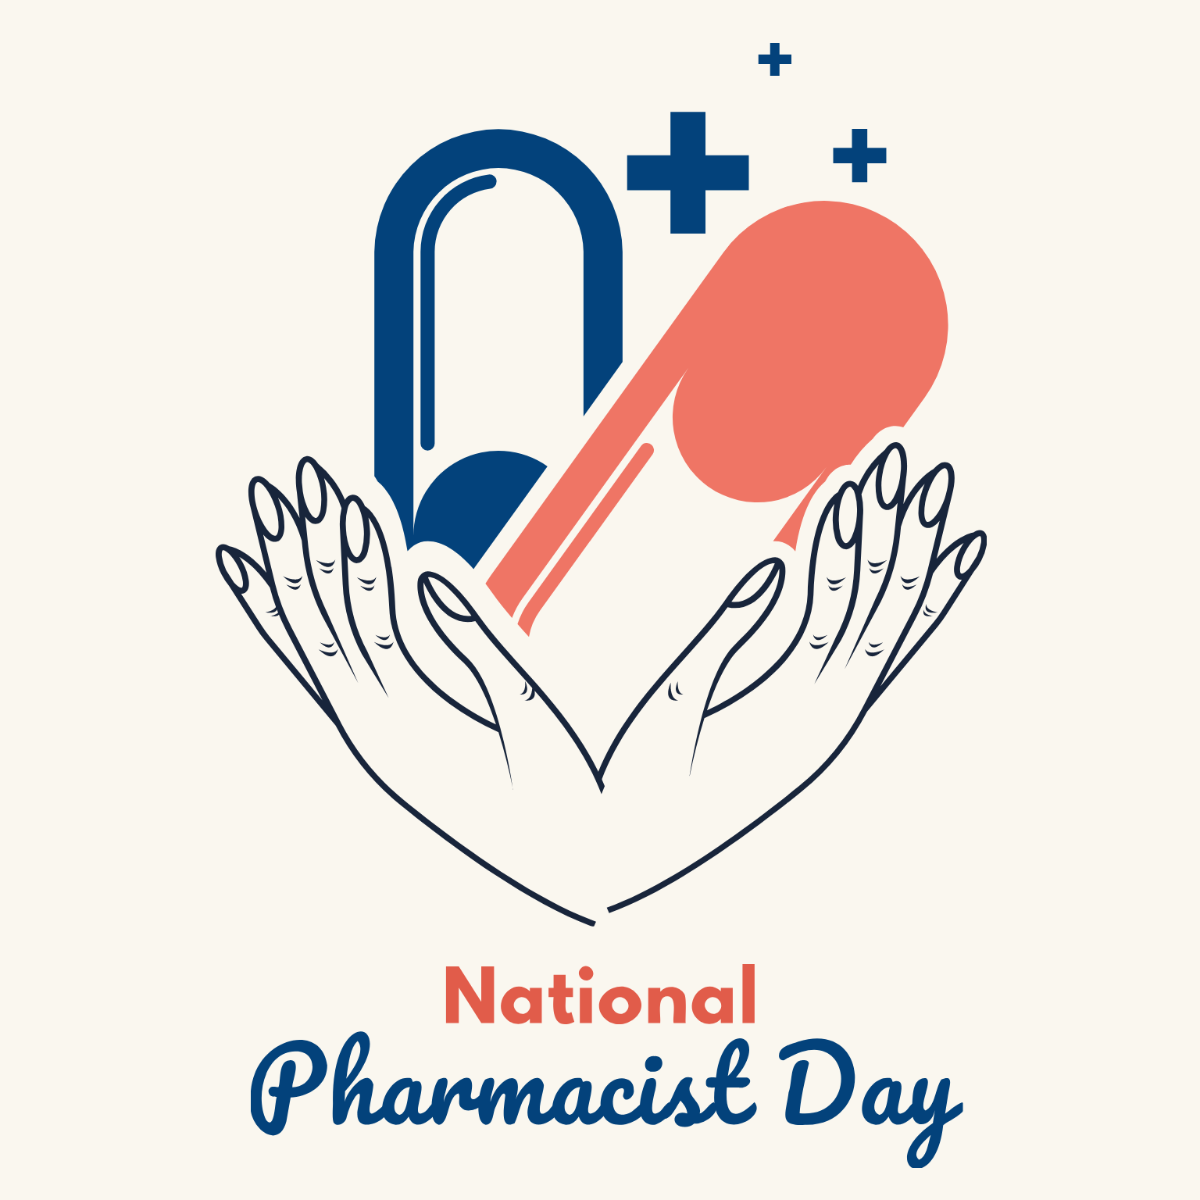 Free National Pharmacist Day Illustration Template